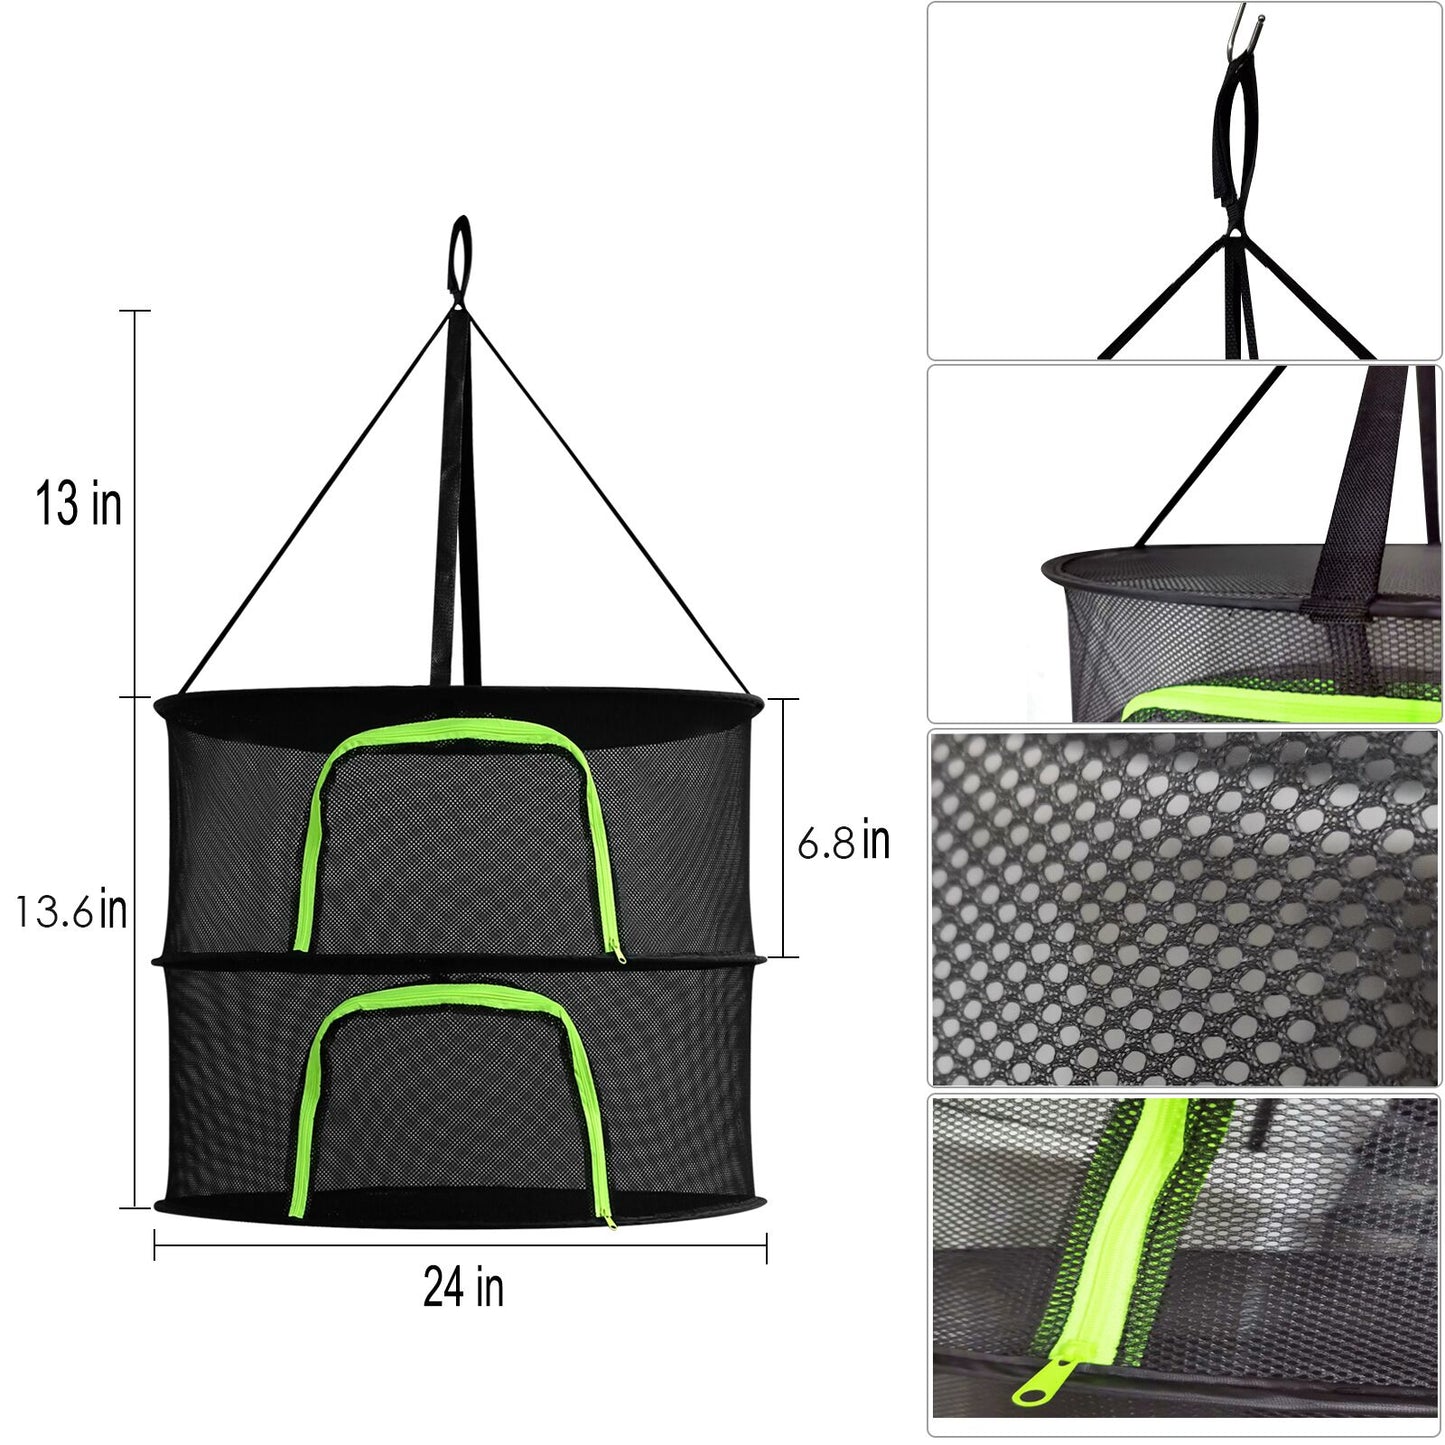 Herb Drying Rack 2 Tier 2ft Black Mesh Hanging Dry Dryer Net with Pruning Shear for Hydroponics Plants Buds